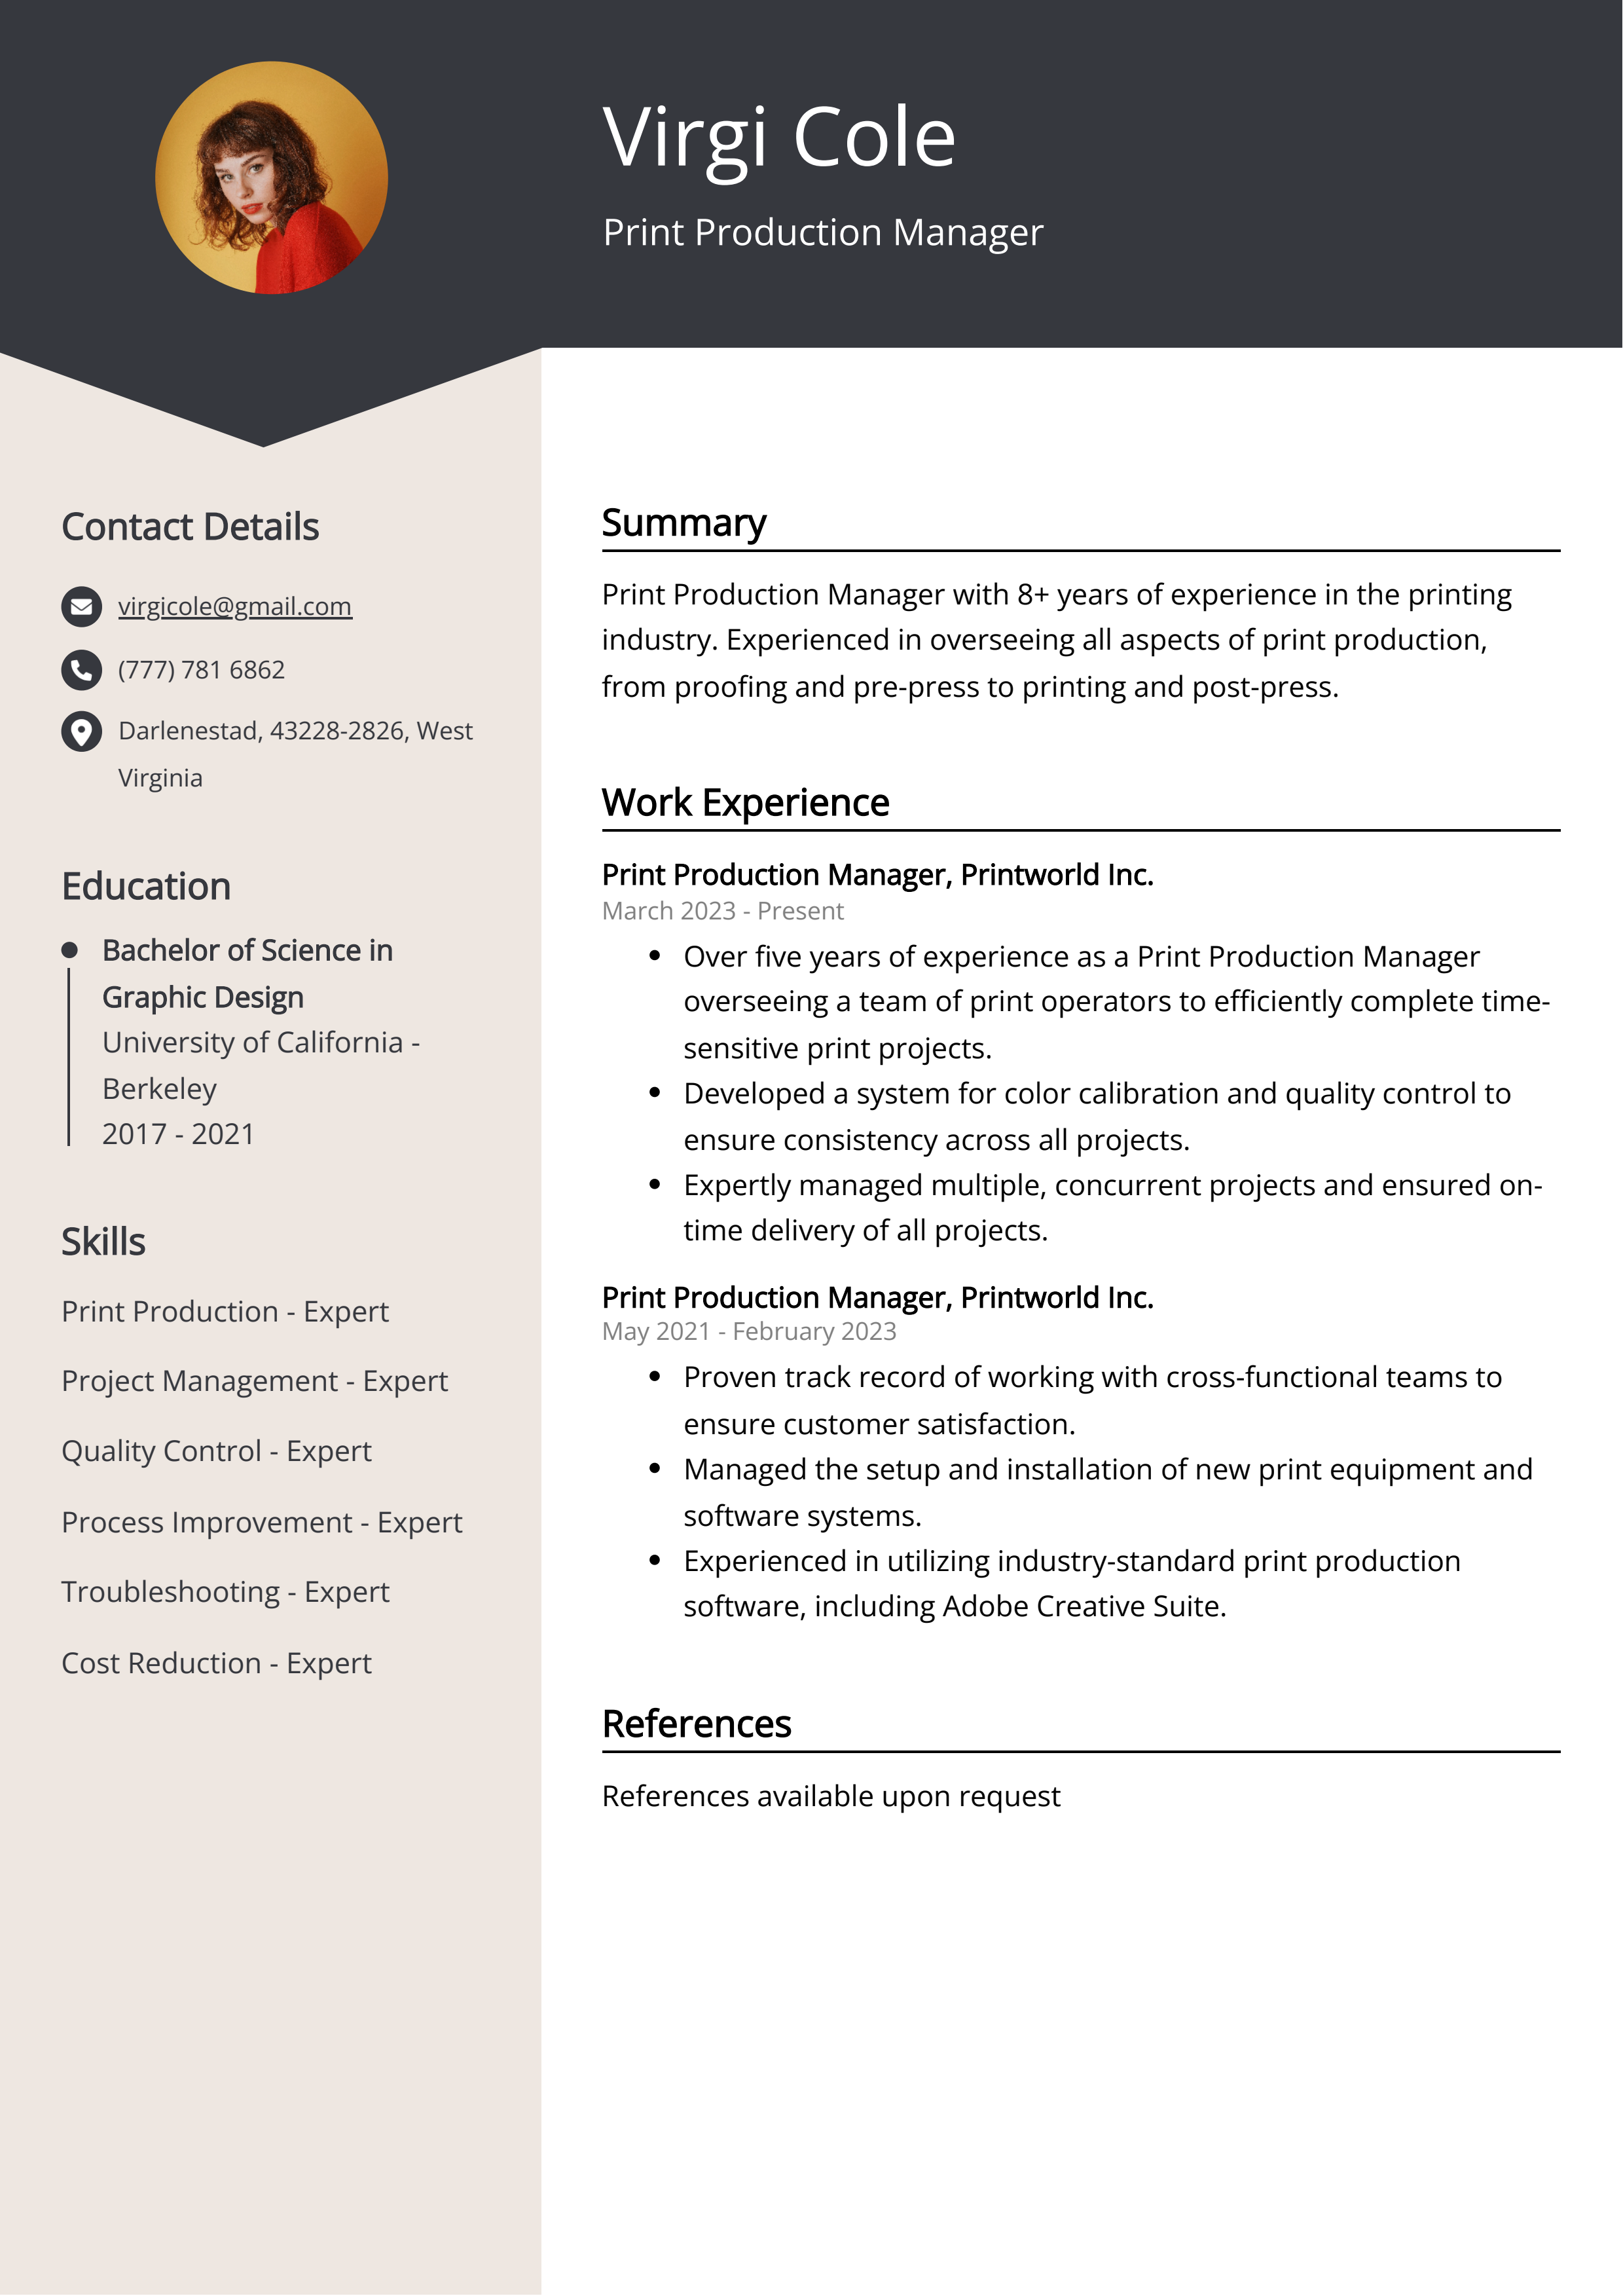 Print Production Manager CV Example